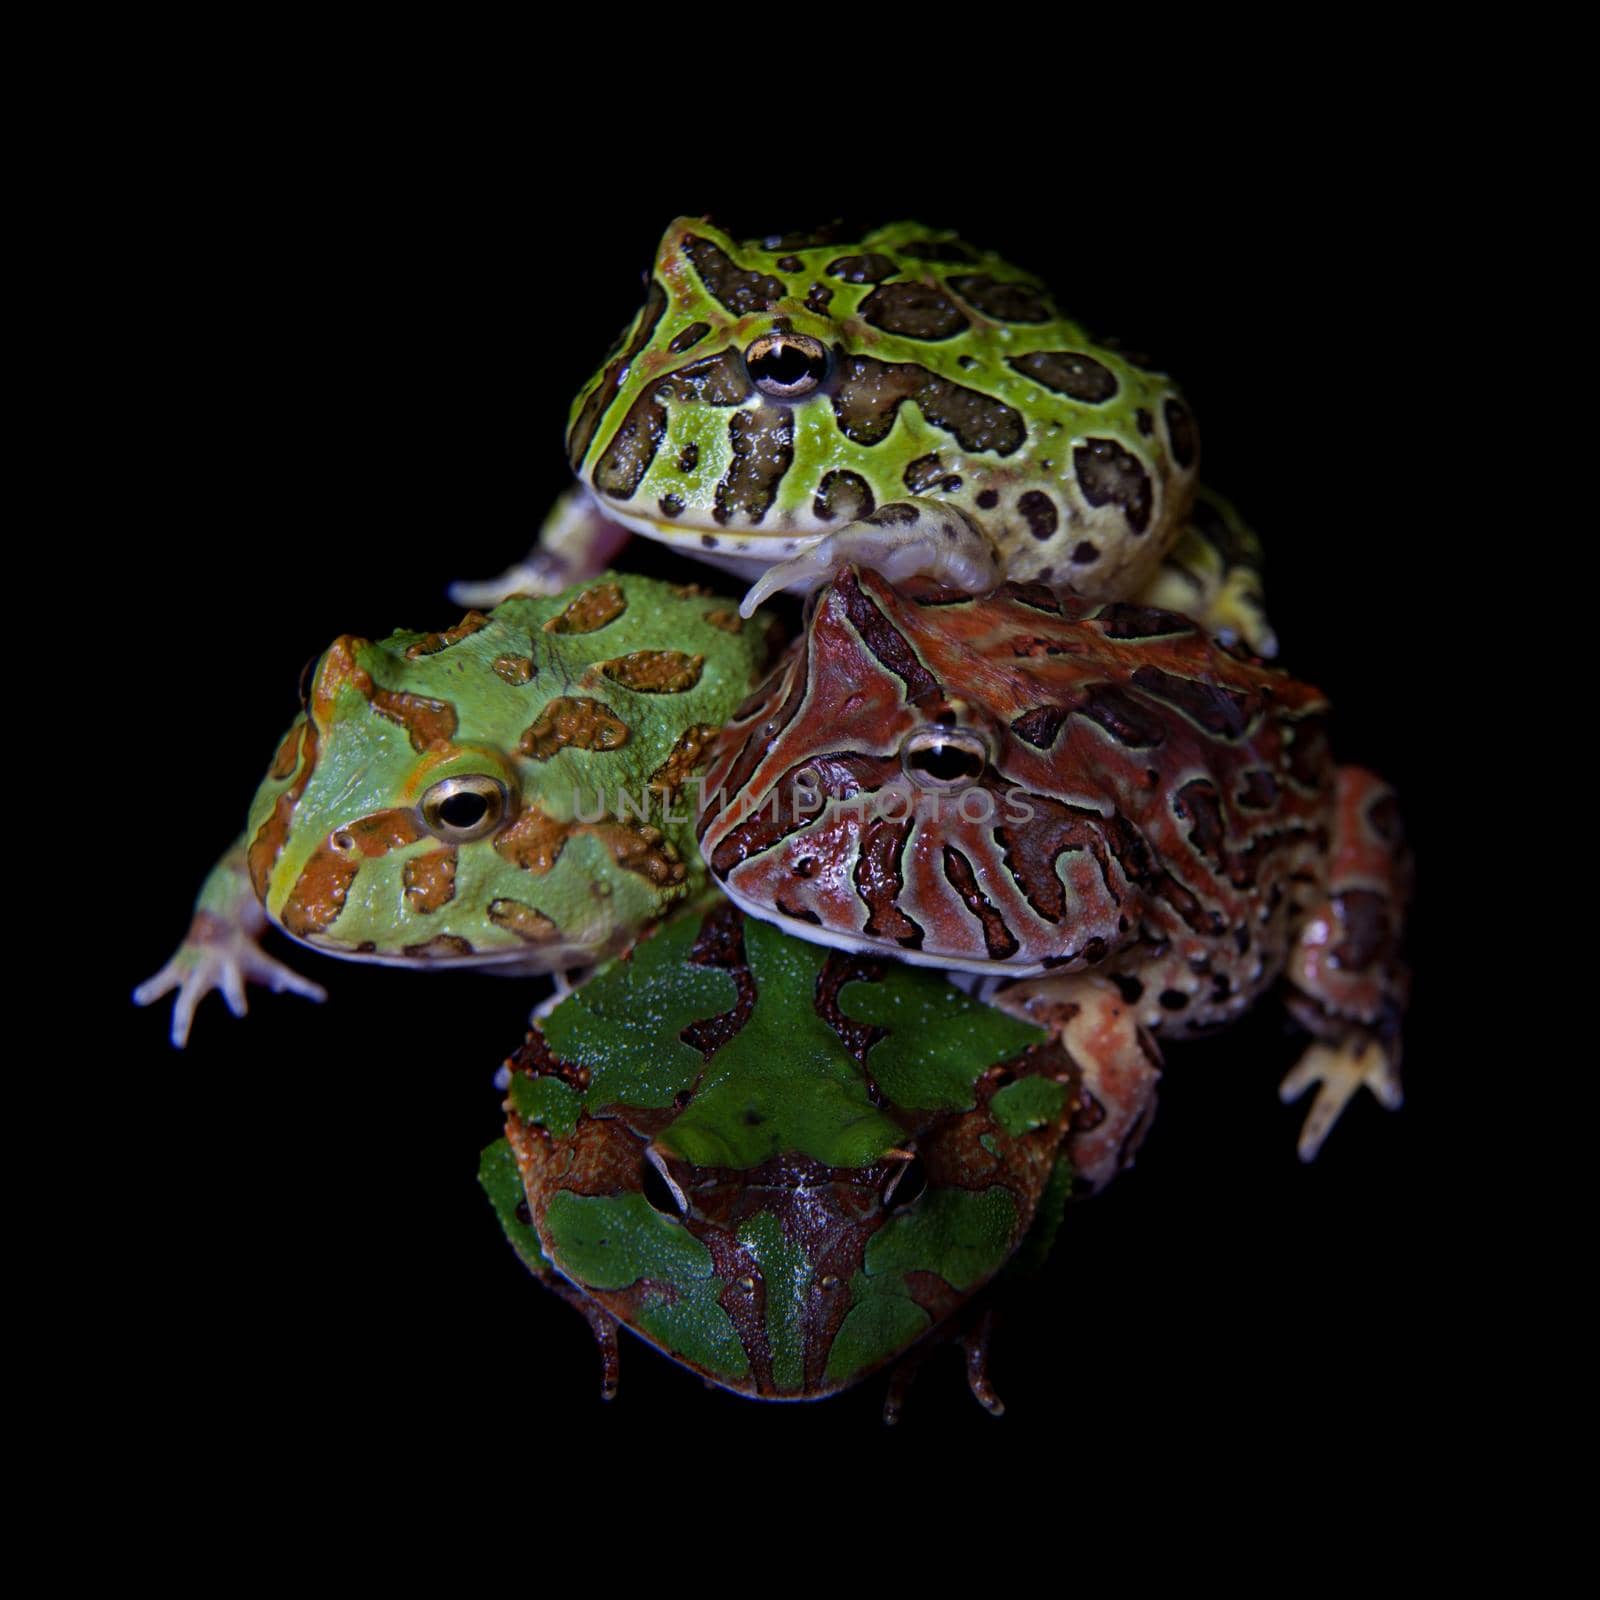 The pacman frogs, Ceratophrys genus, isolated on black background